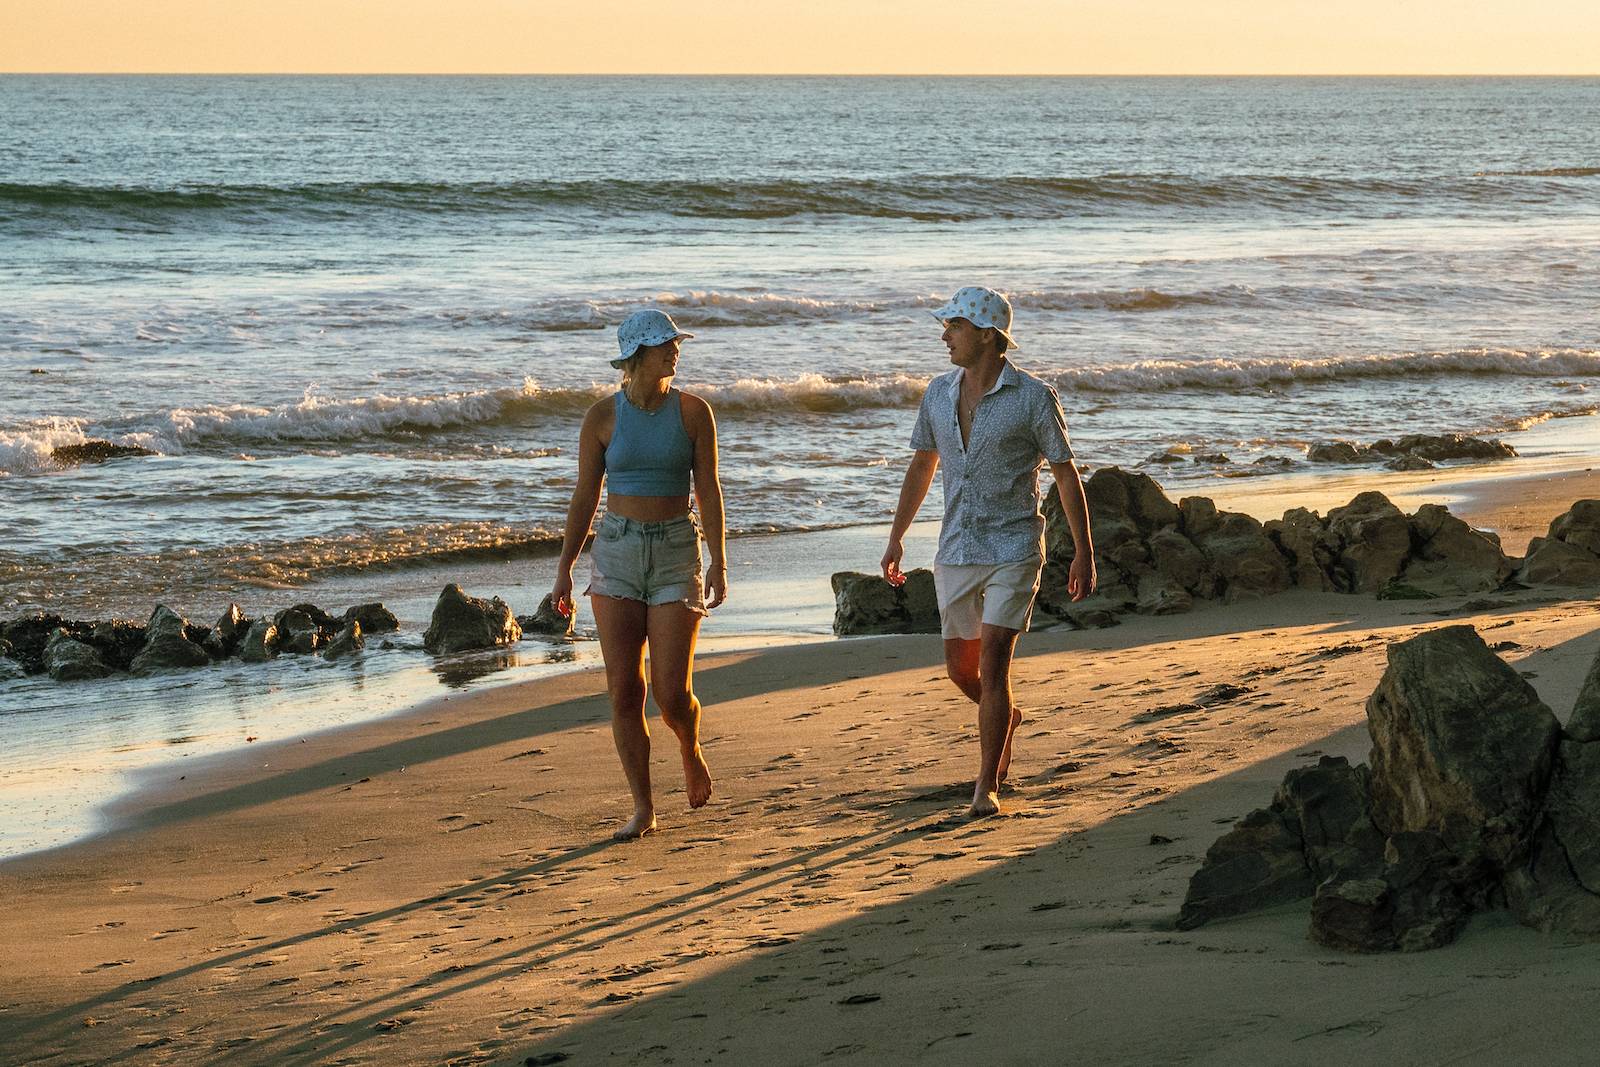 Two people walking on a sunny beach with bucket hats on.